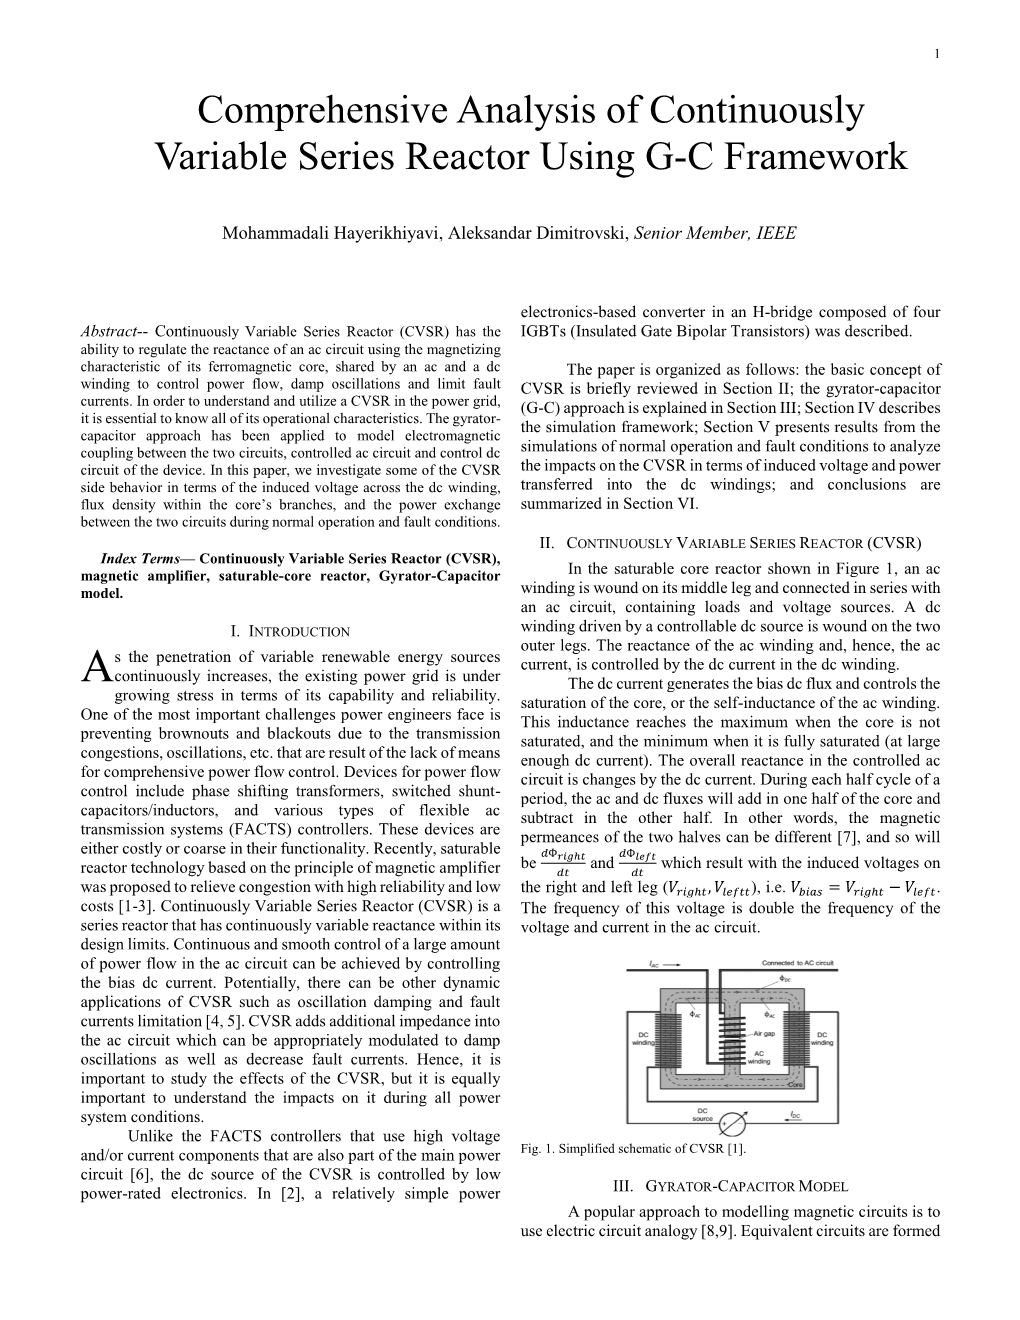 Comprehensive Analysis of Continuously Variable Series Reactor Using G-C Framework